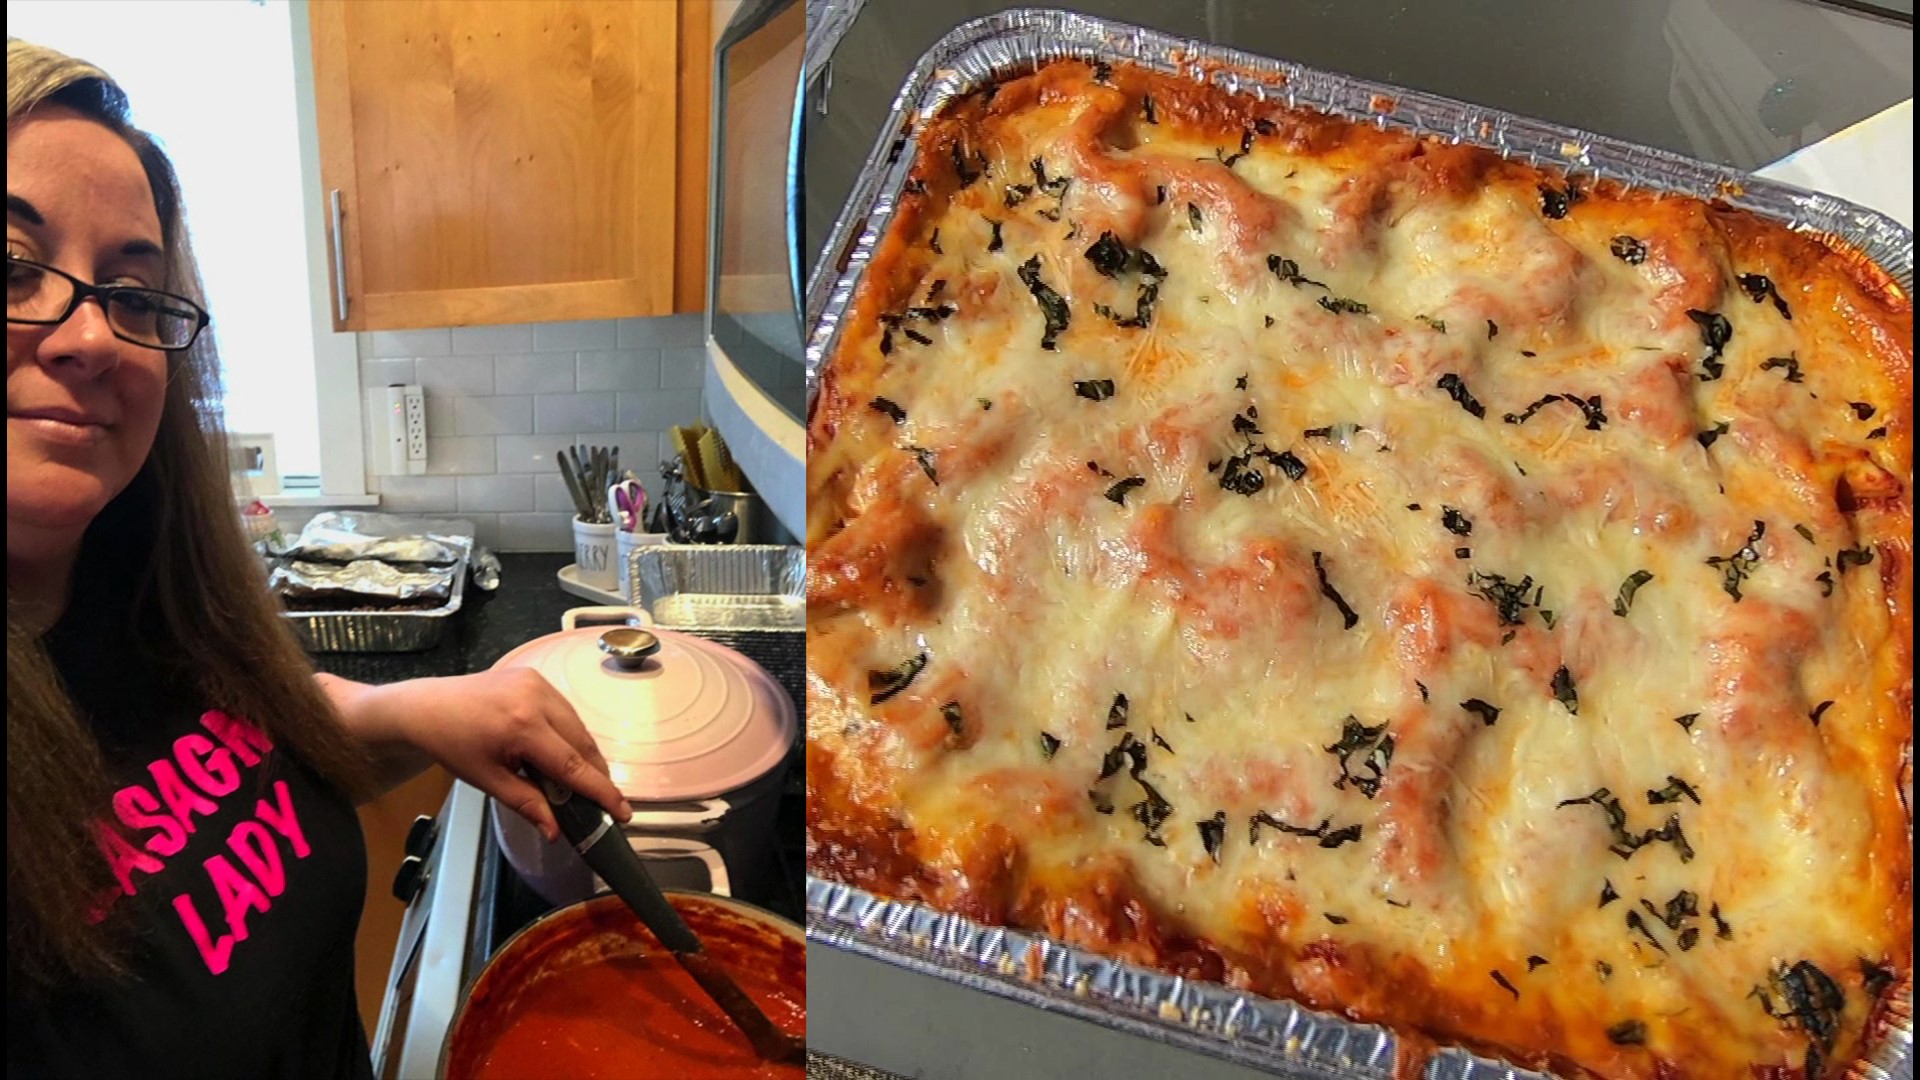 The Lasagna Lady has baked hundreds of dishes for neighbors